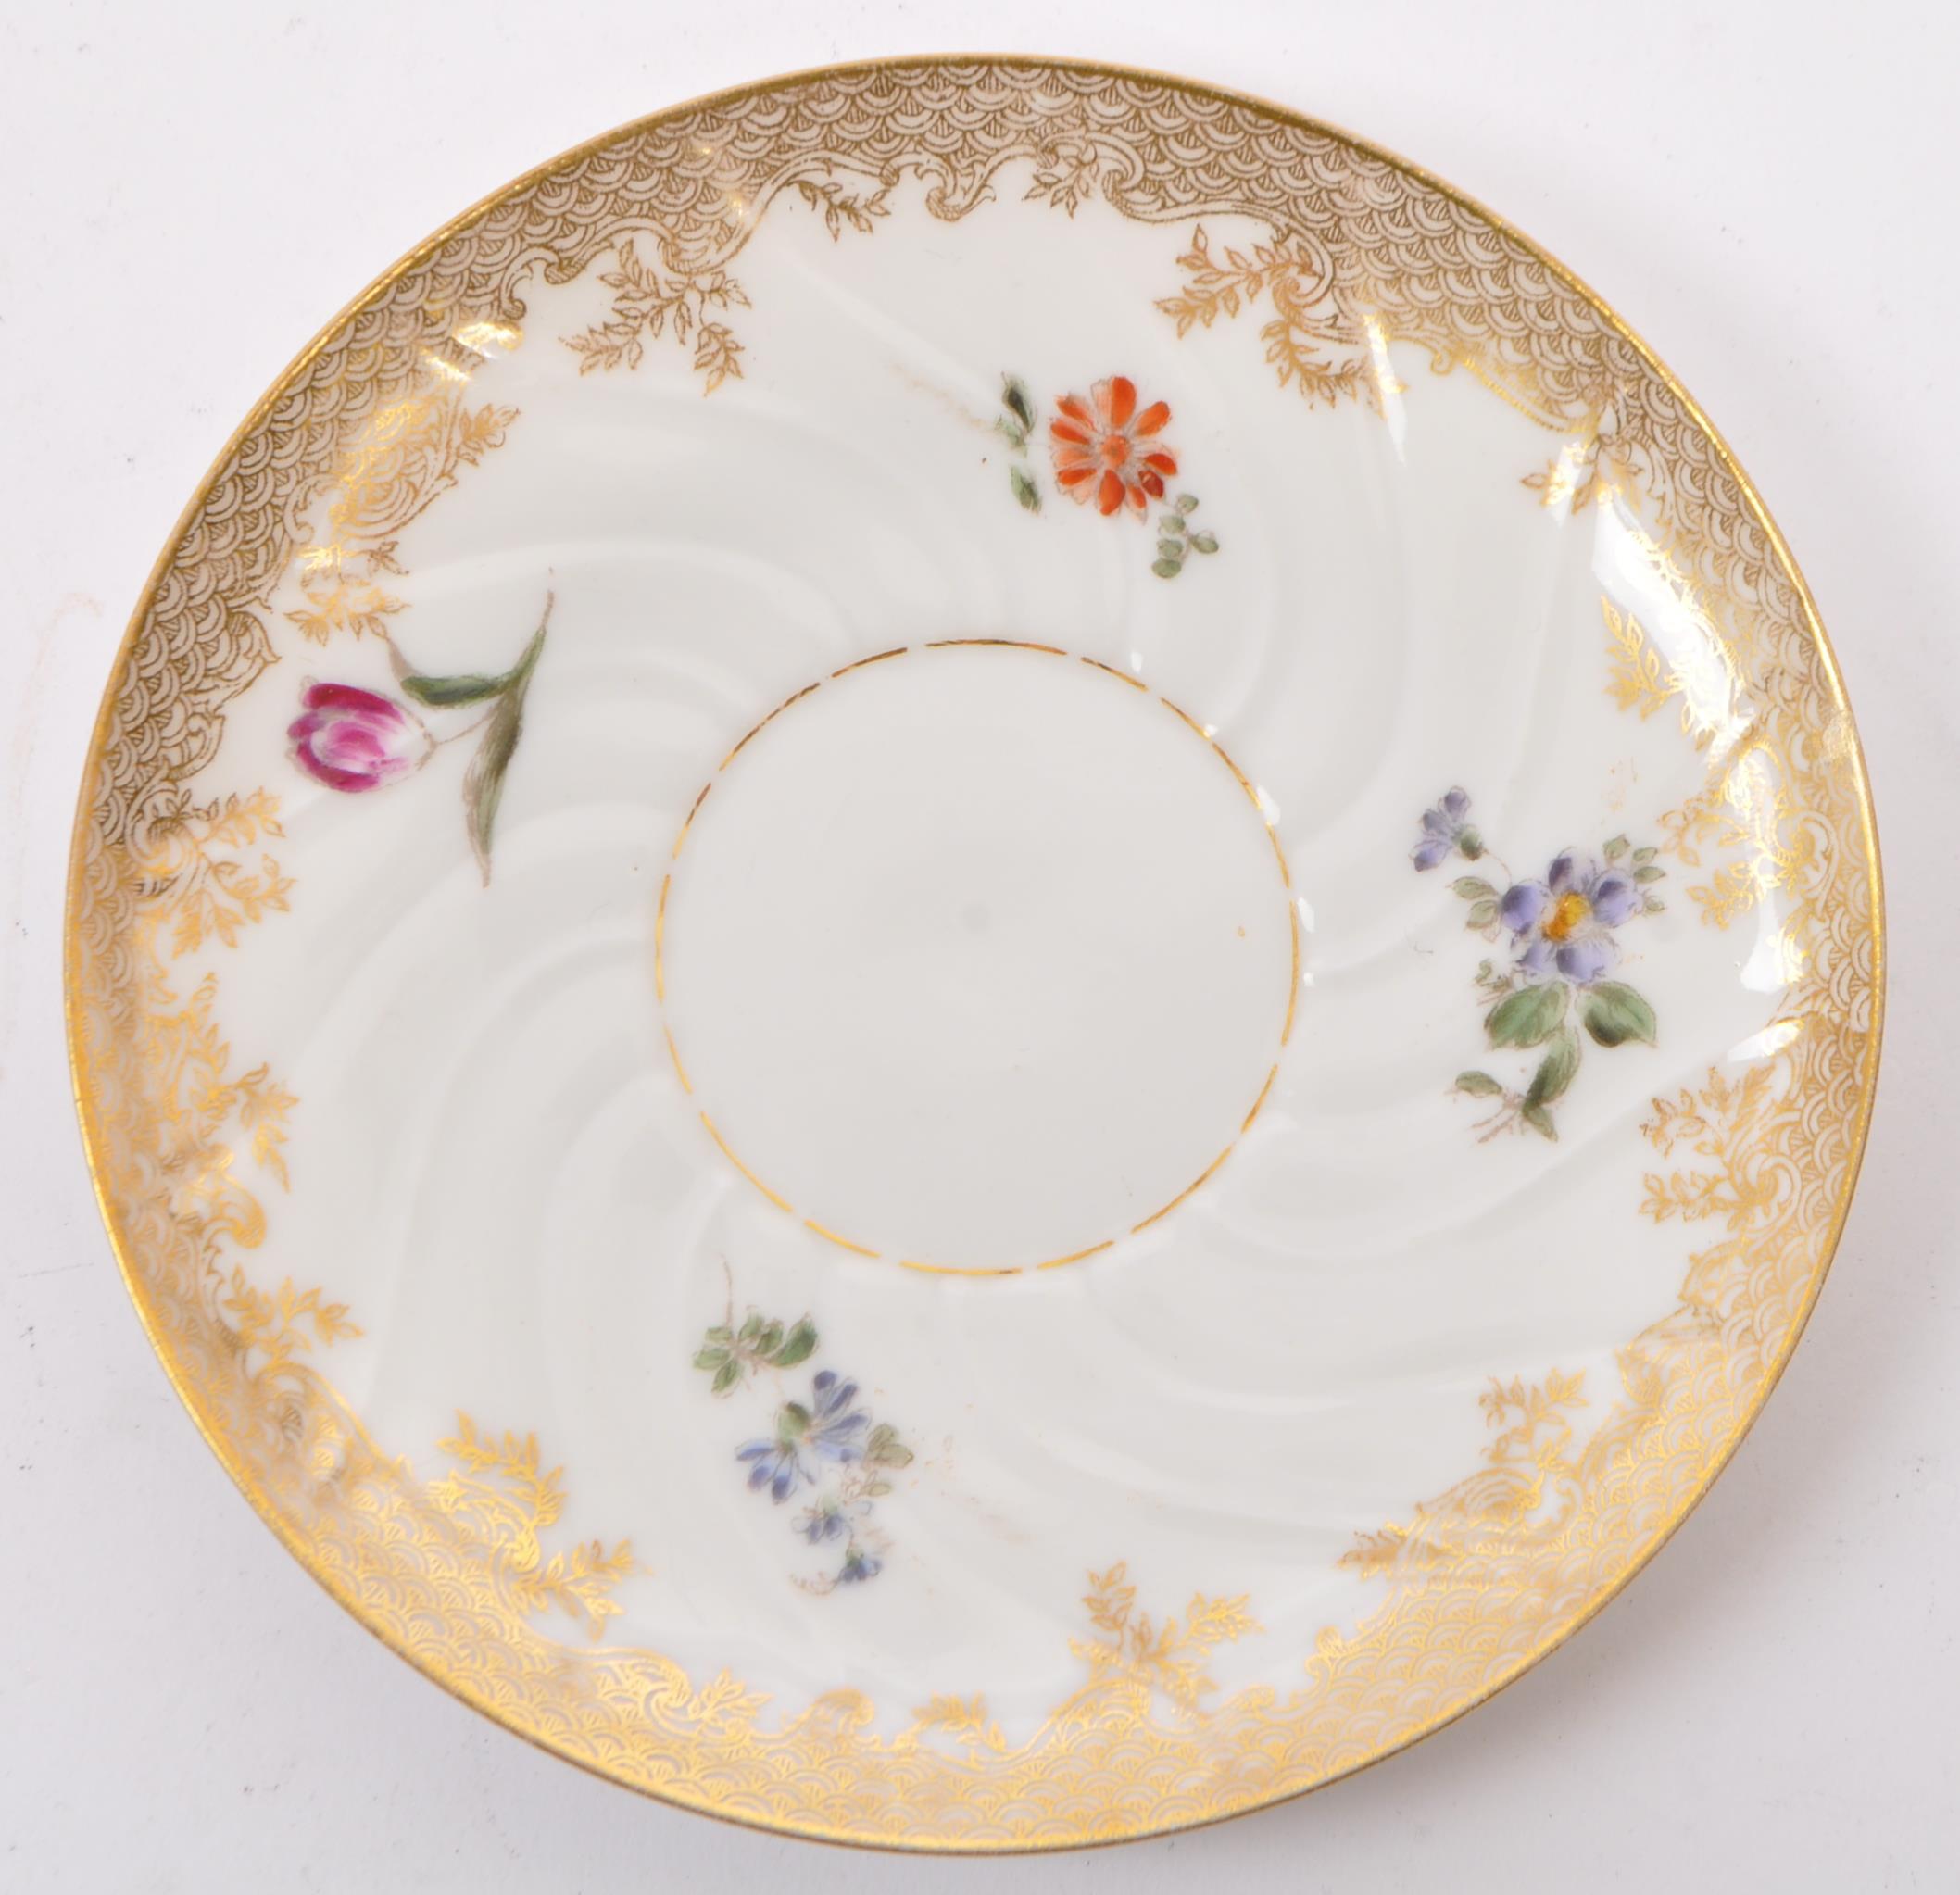 EARLY 20TH CENTURY HAND PAINTED LIMOGES CHINA TEA SERVICE - Image 4 of 5